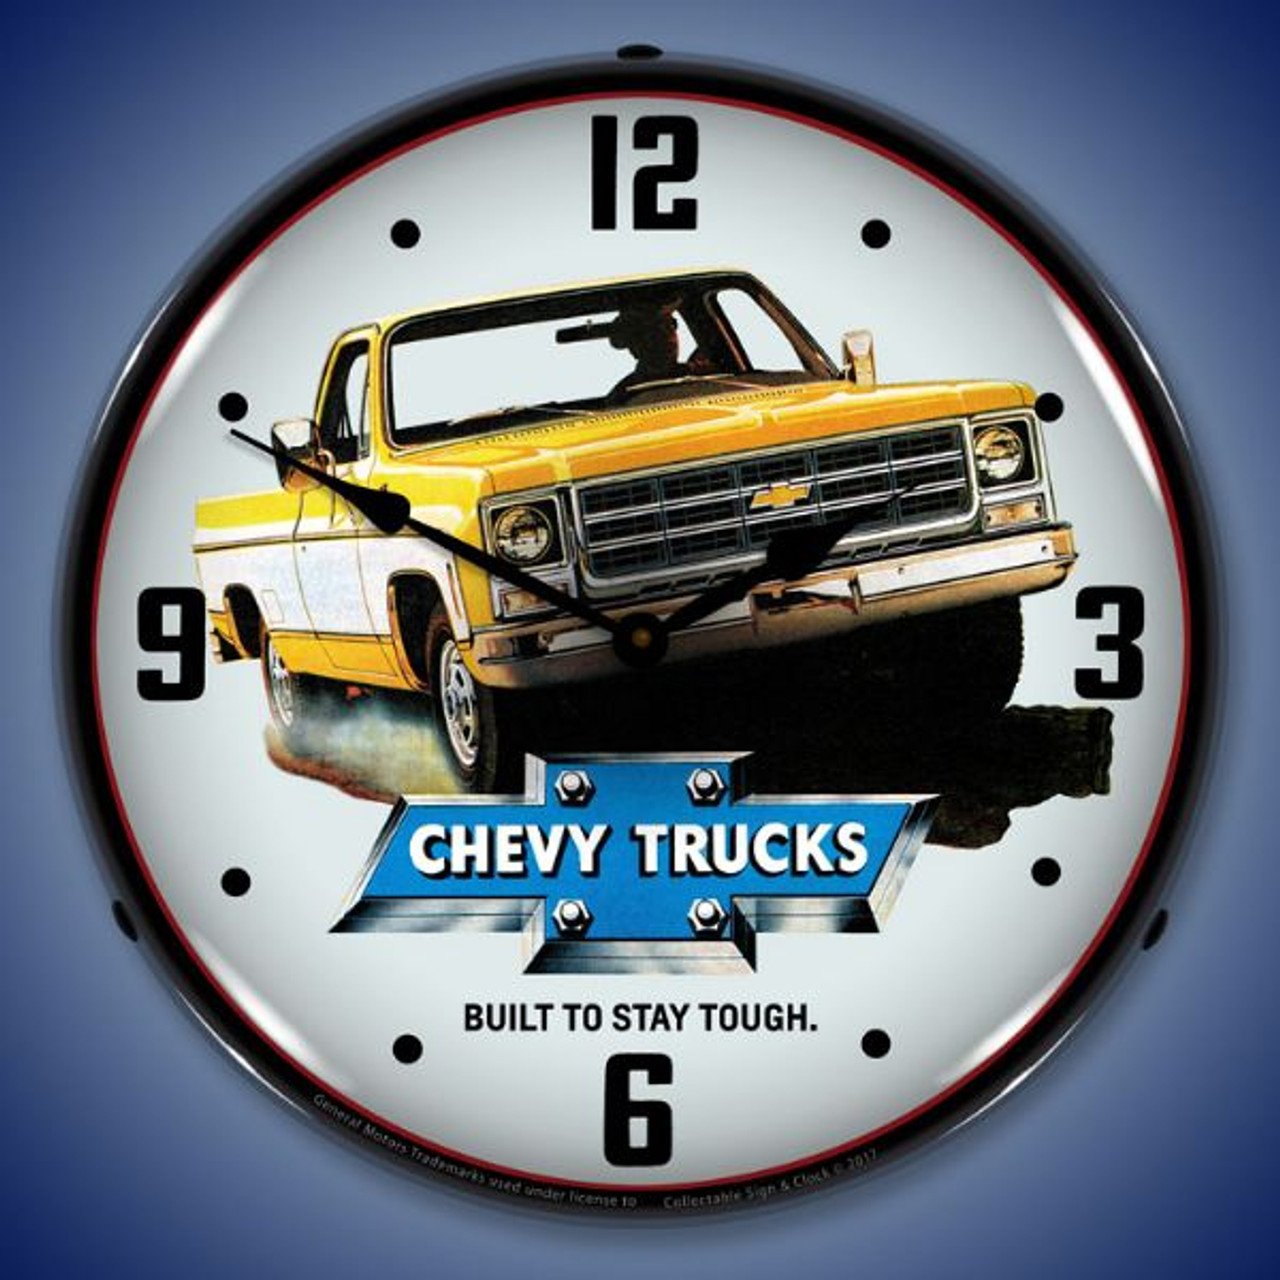 1979 Chevrolet Truck Lighted Wall Clock 14 x 14 Inches